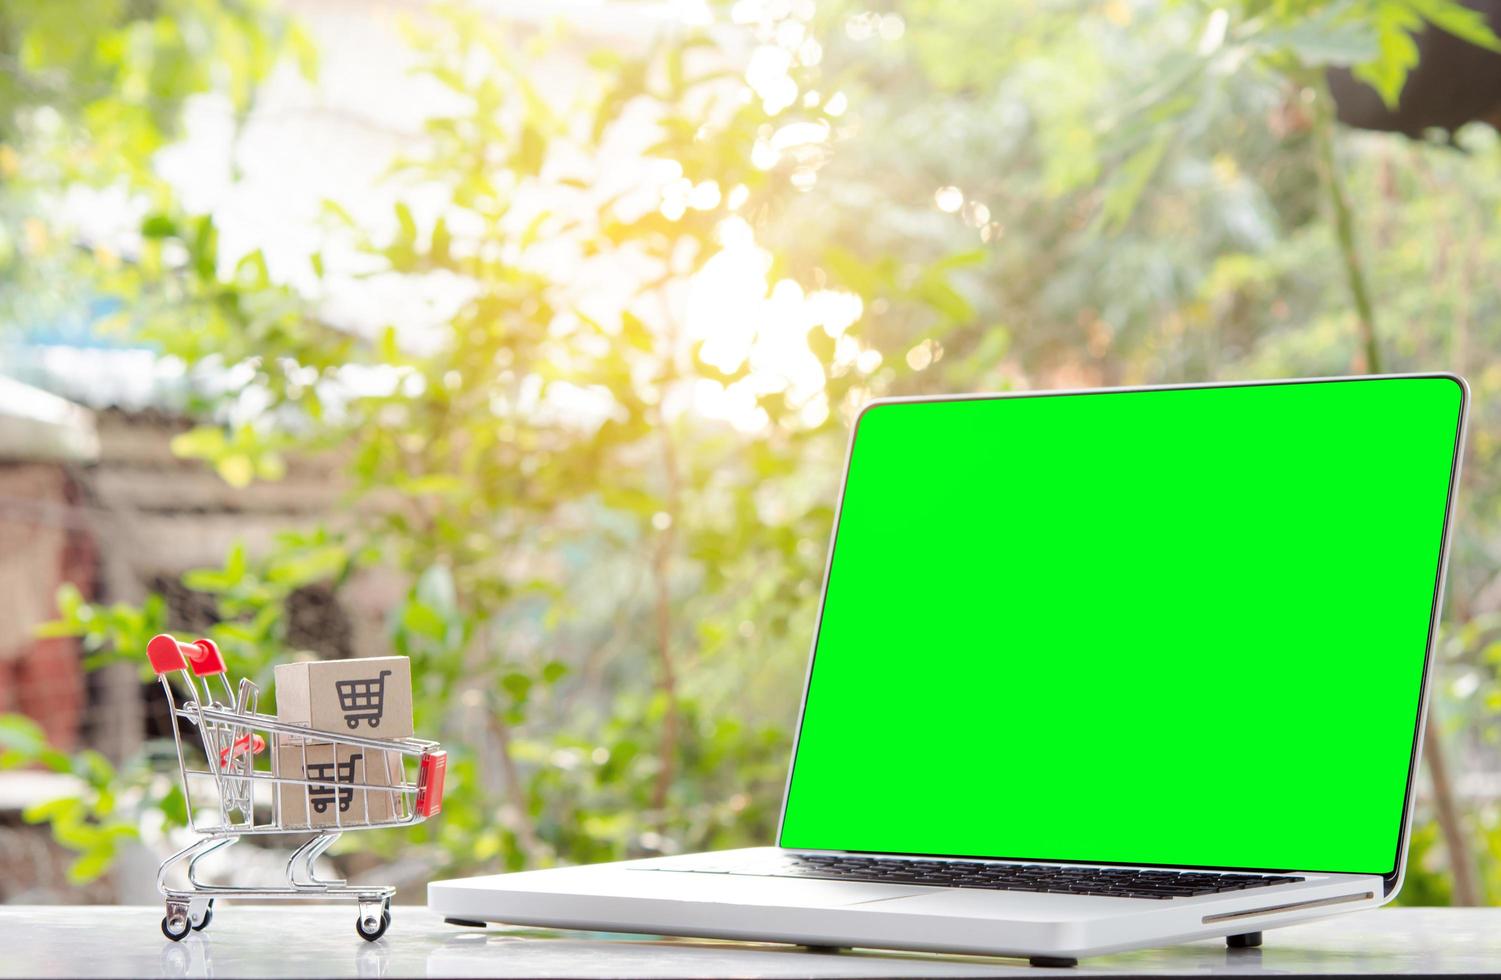 Shopping online. cardboard box with a shopping cart logo in a trolley and laptop green screen . Shopping service on The online web. offers home delivery photo